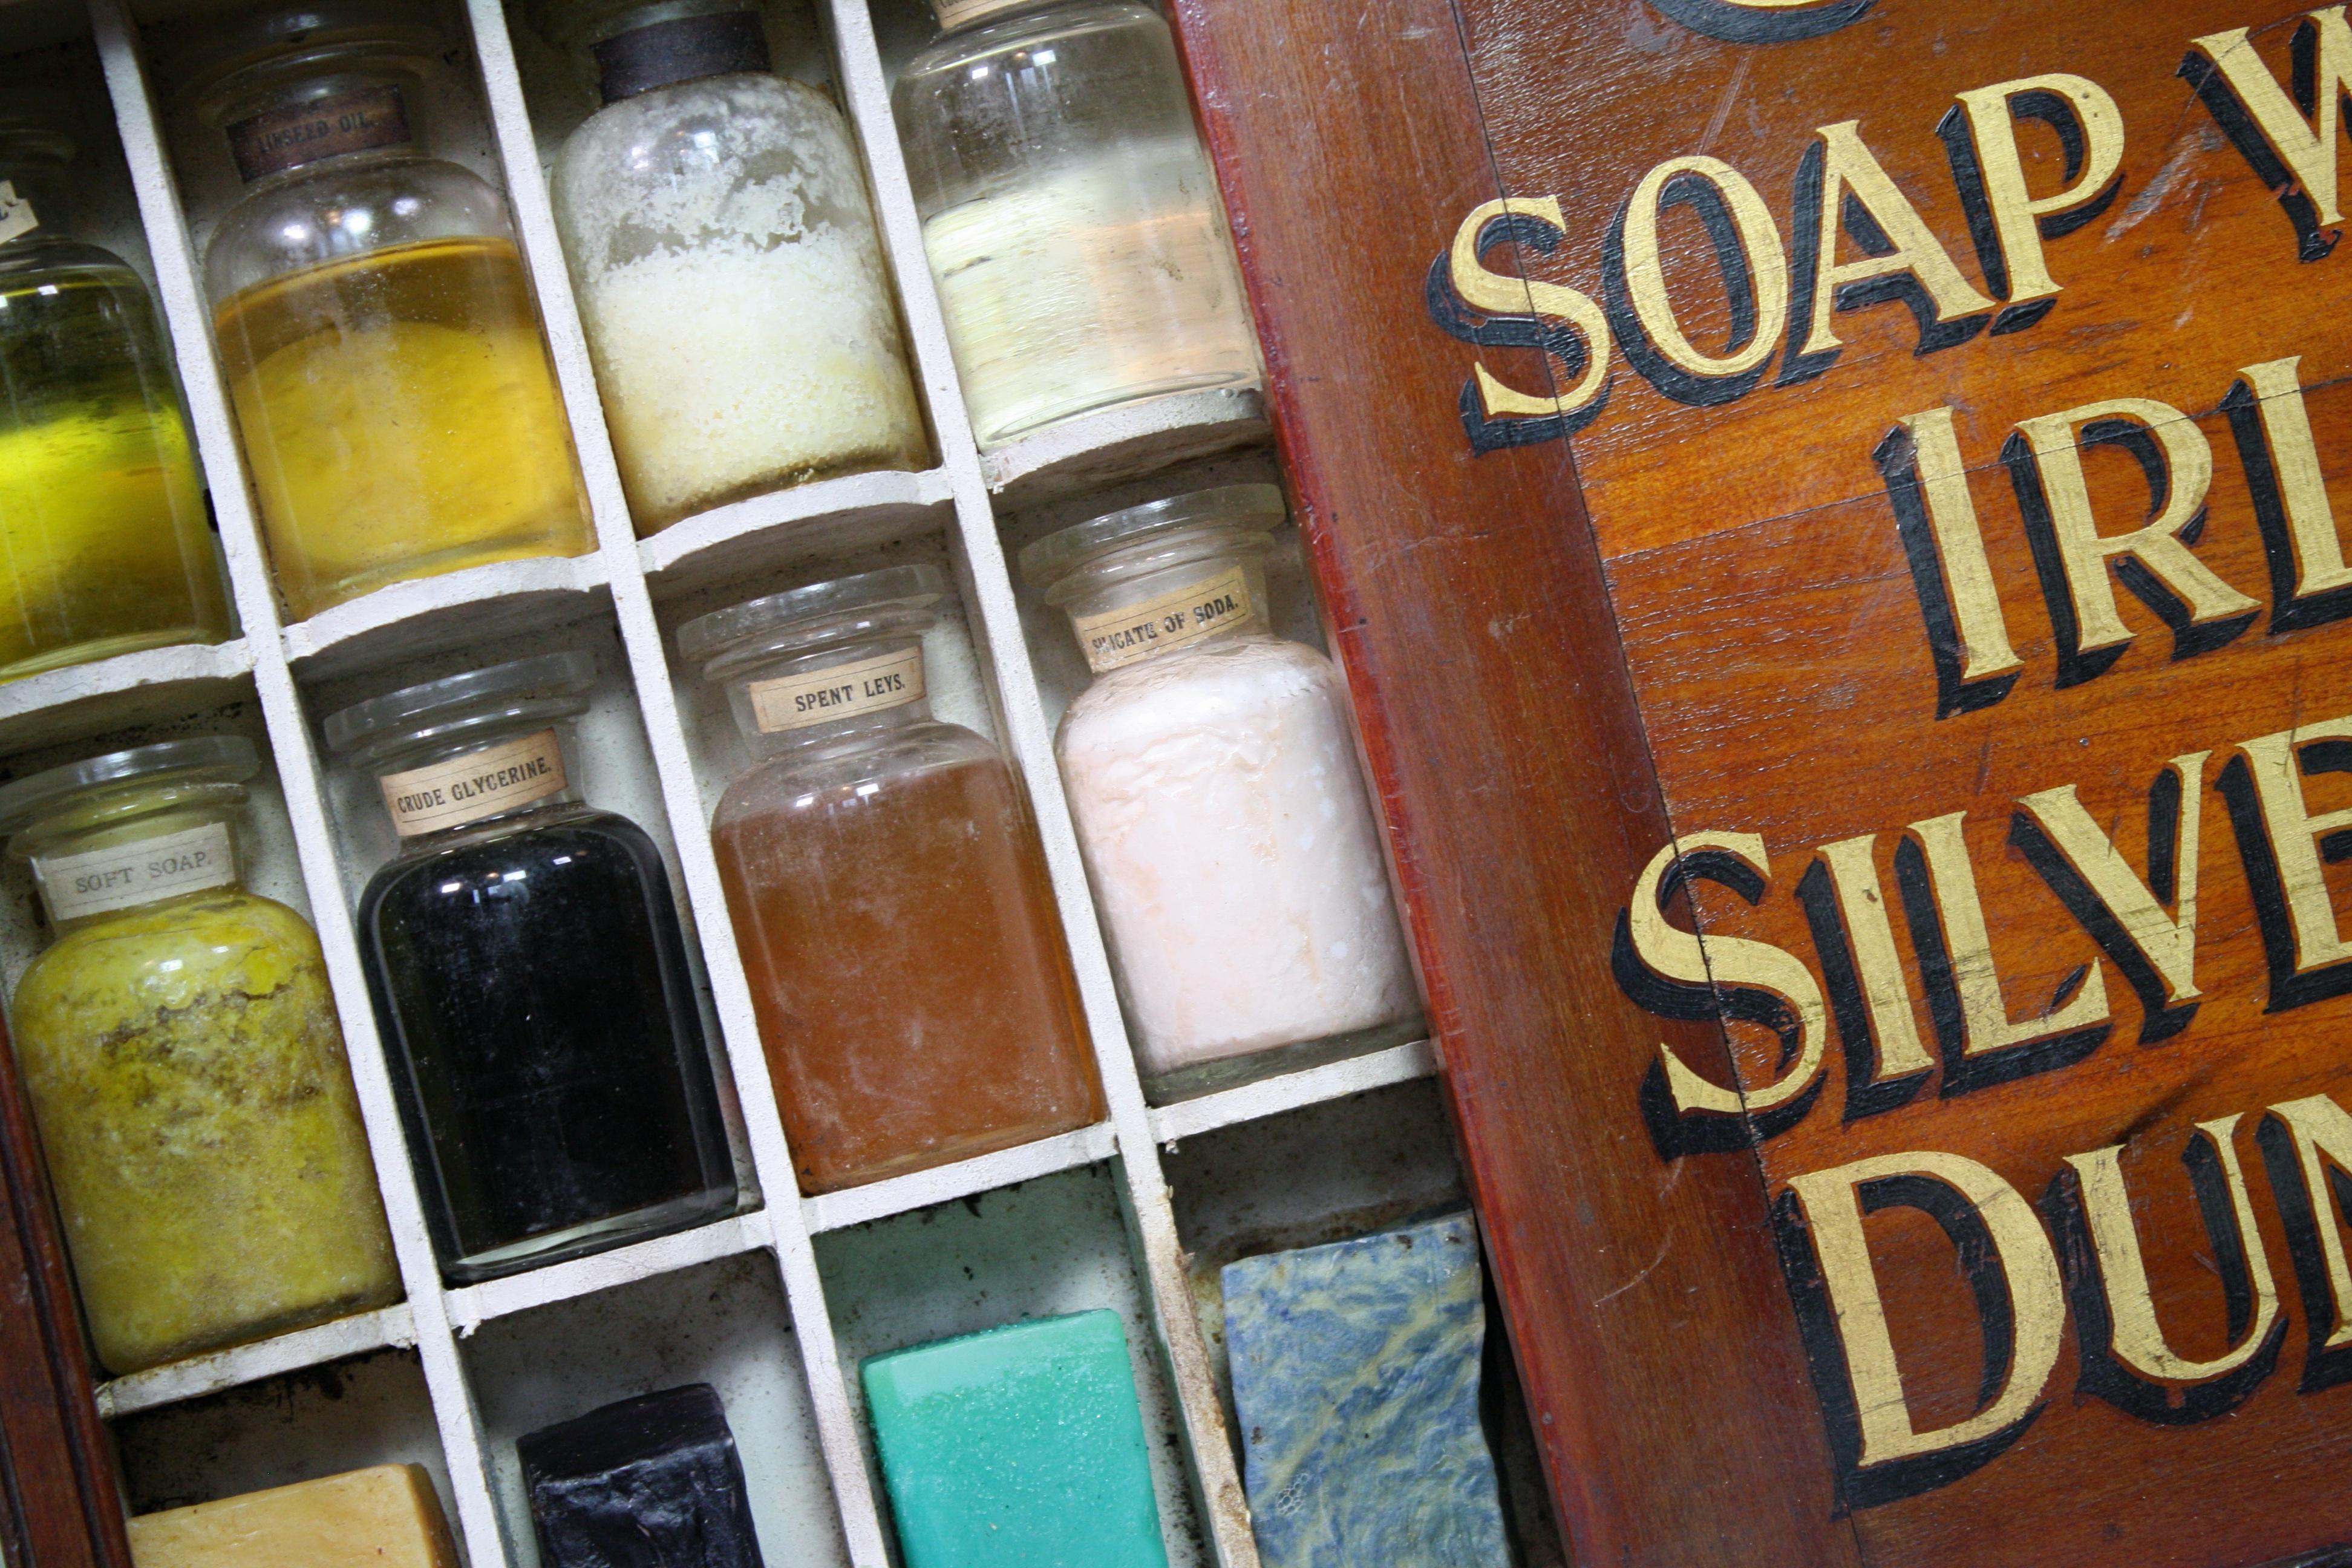 A unusual travelling tradesman's soap display case, early 20th century in age likely Edwardian.

A segmented internal draw hidden via the sliding cover, housing fourteen hand blown glass vials and six blocks of sample soap. Inside the vials are a